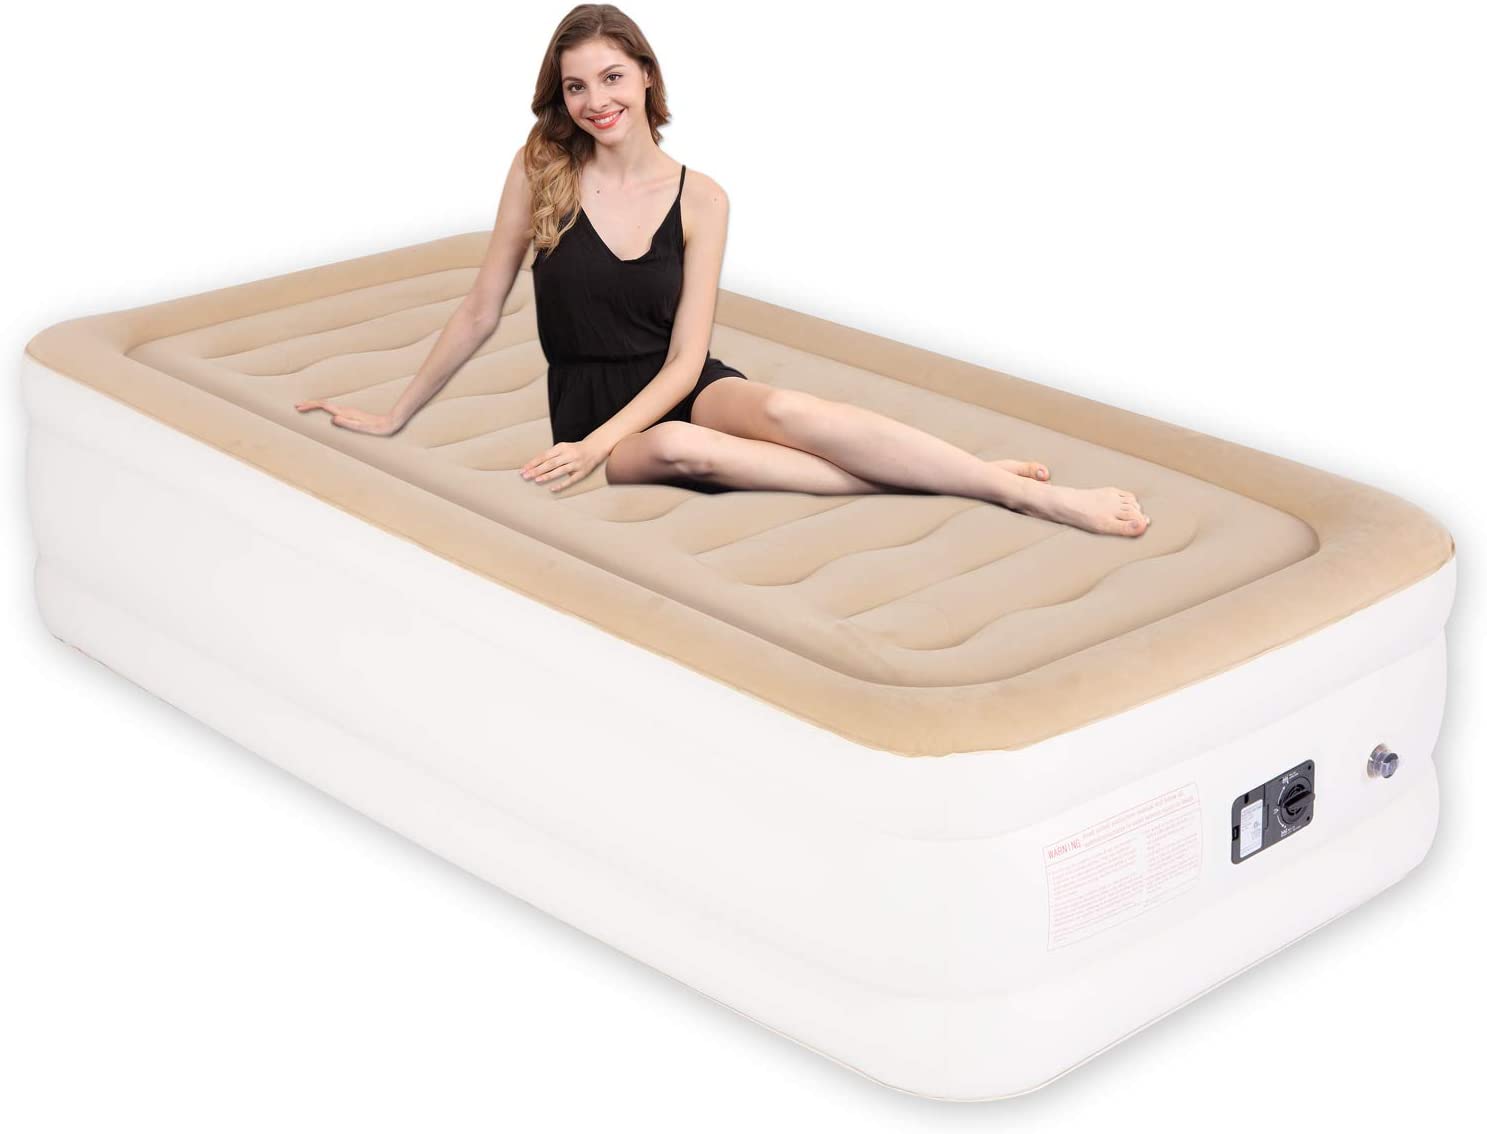 This air bed’s dimensions are different and offers extra length for a taller person.